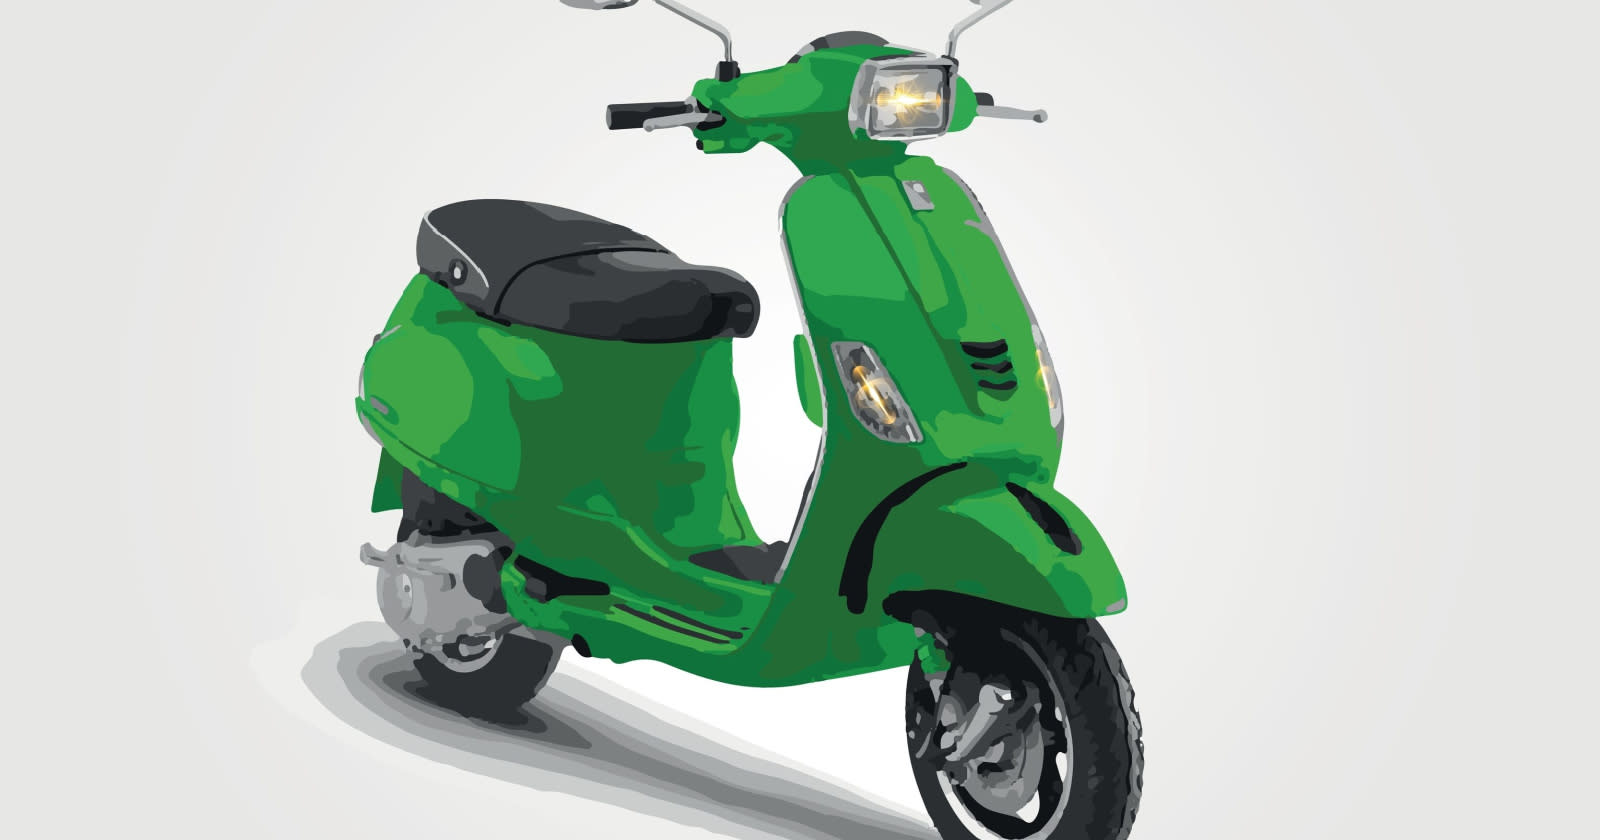 Upcoming Scooters in India: Expected Launch Date and Price